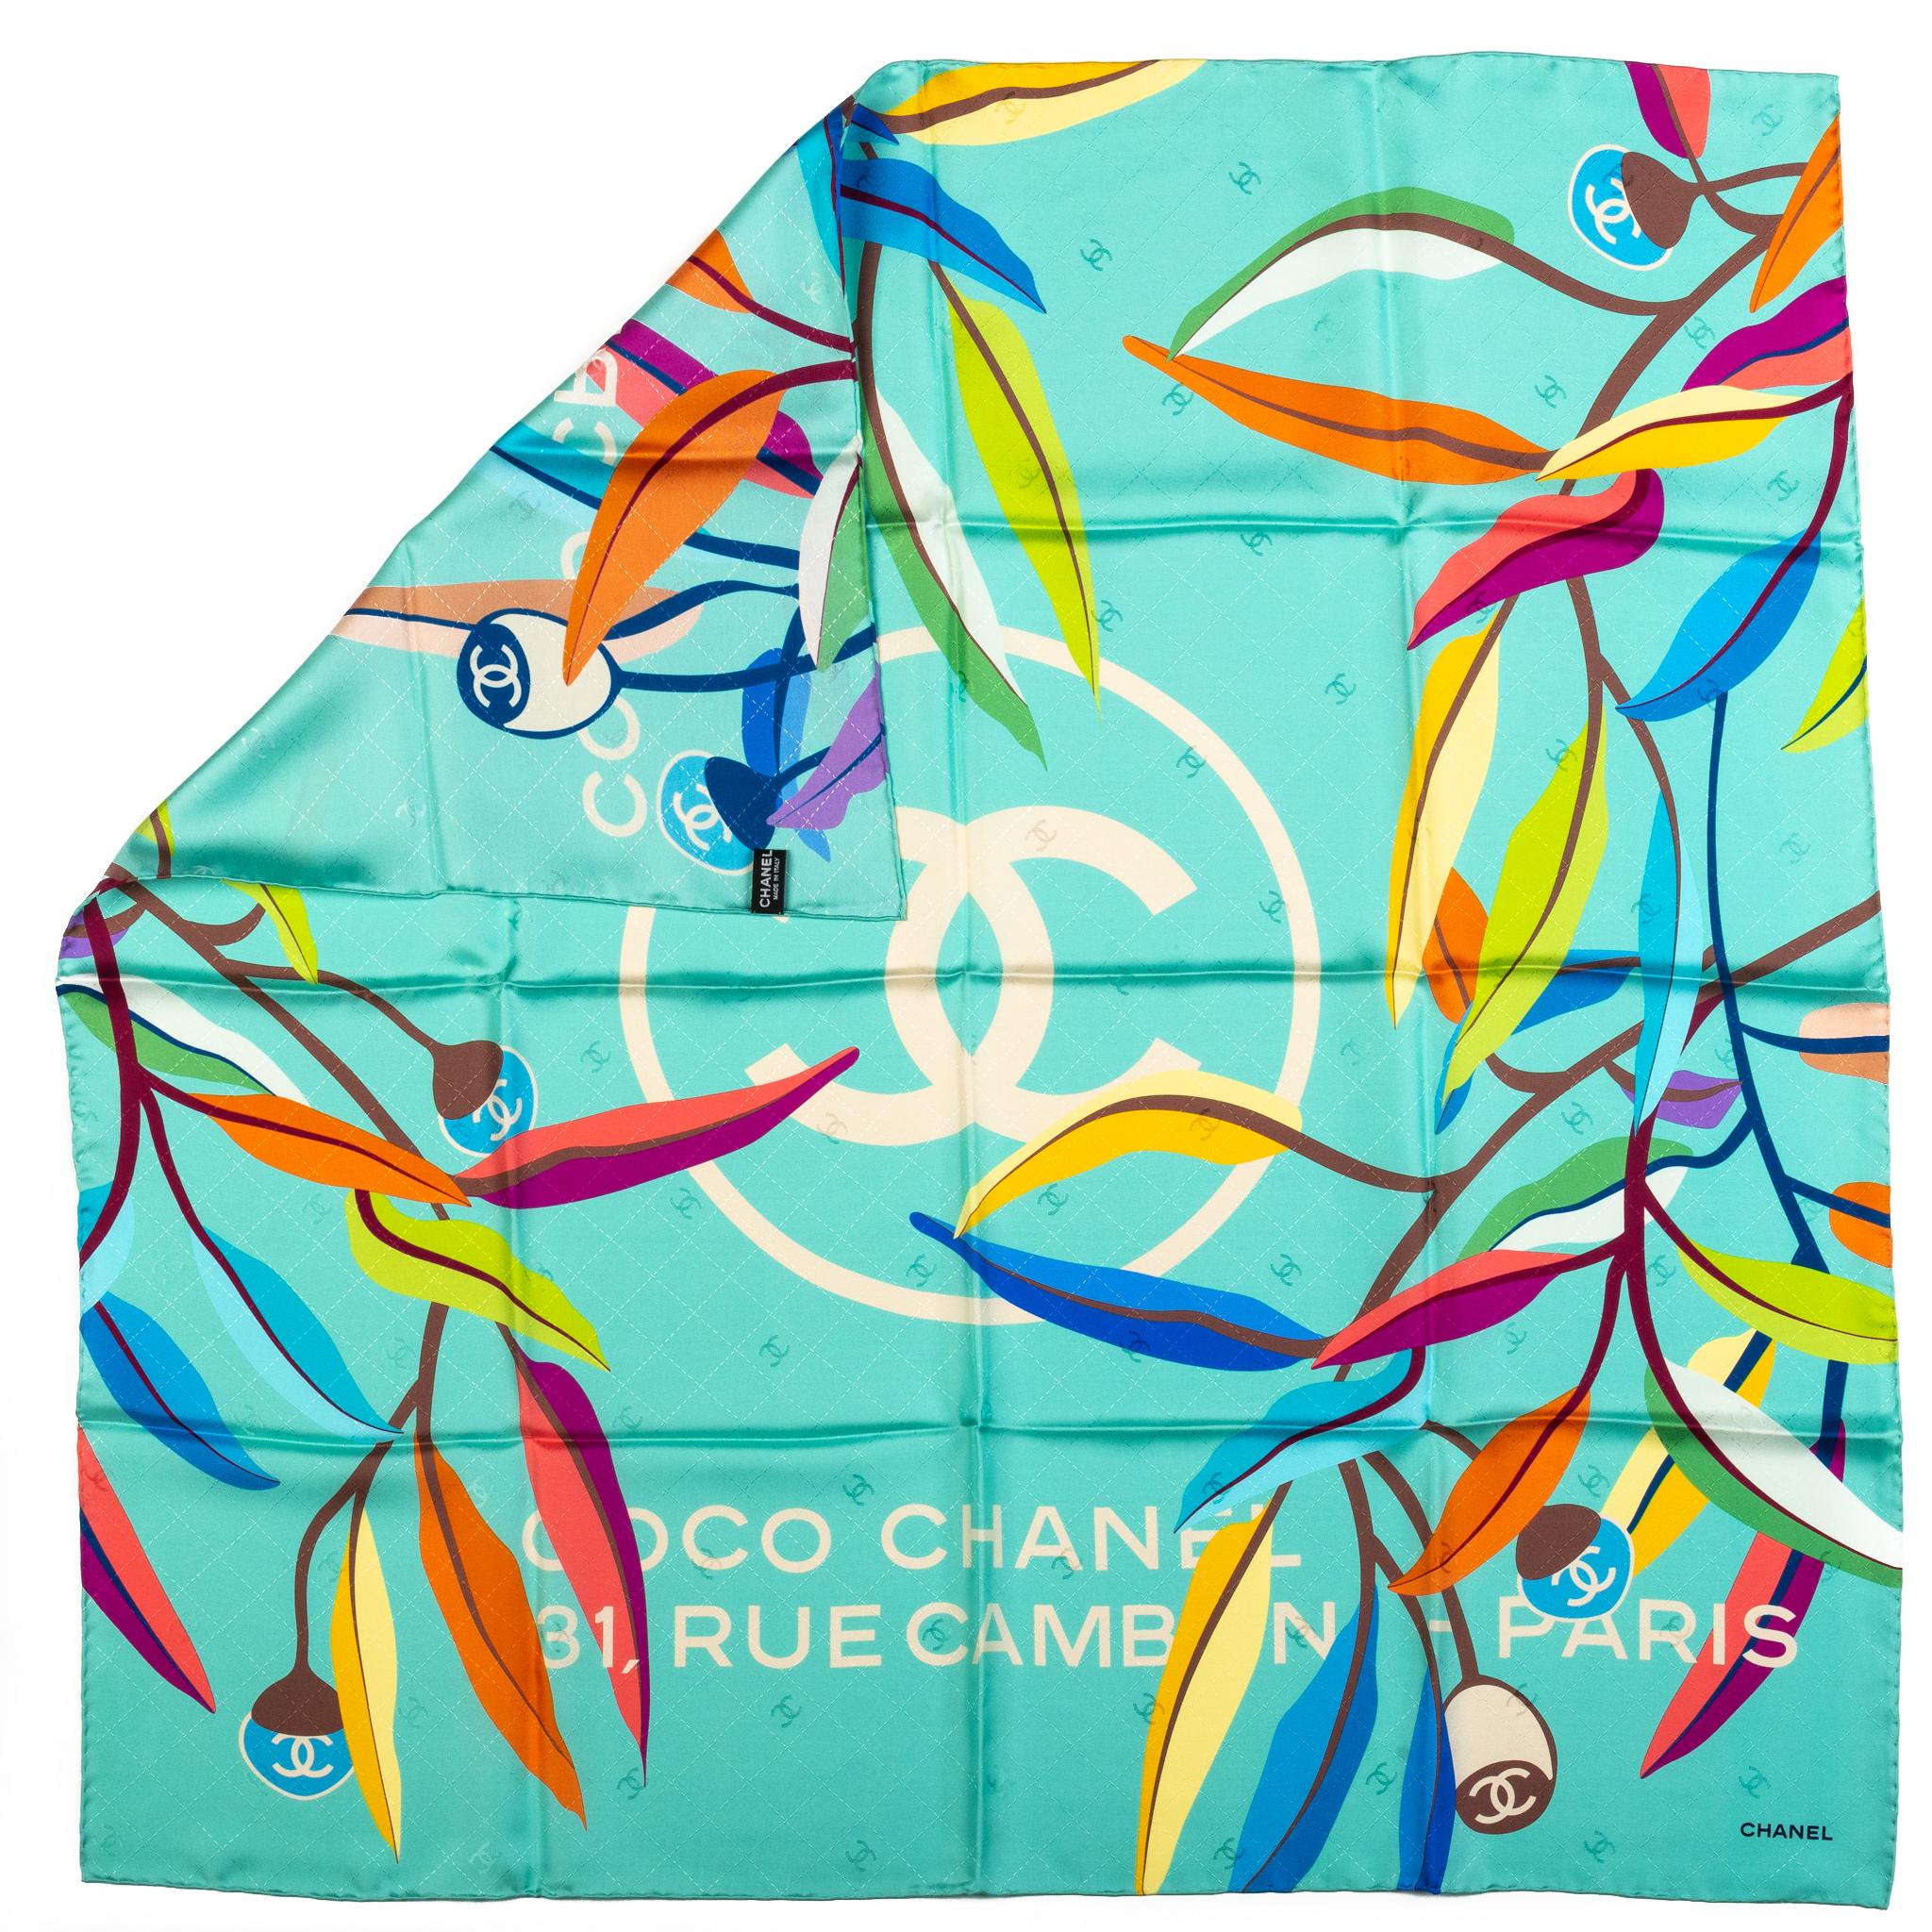 Chanel brand new leaves design 100% silk scarf in teal . Hand rolled edges. Care tag.